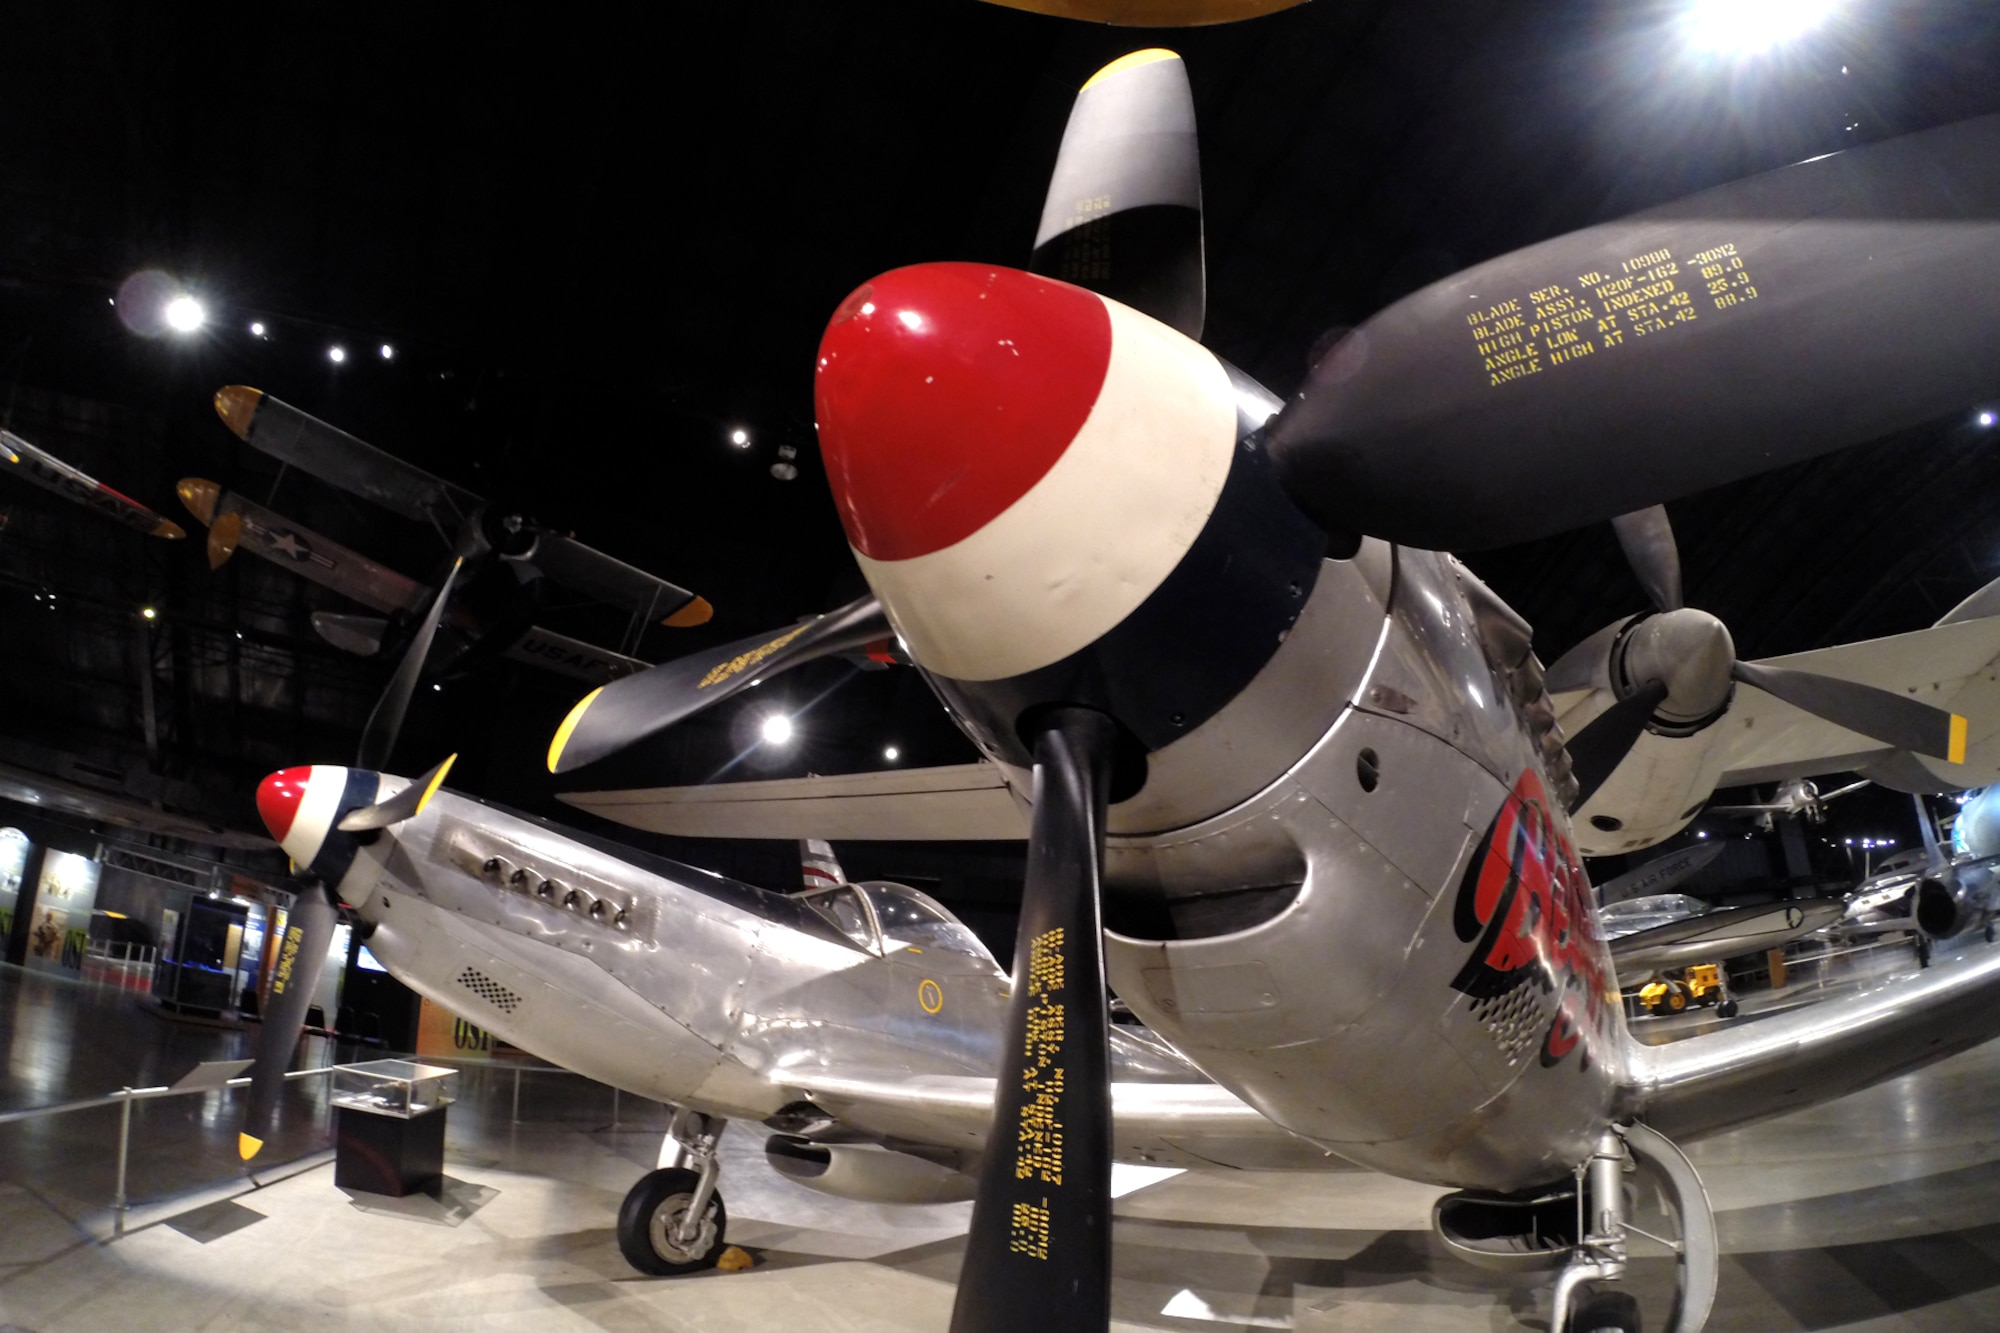 North American F-82B Twin Mustang in the Cold War Gallery at the National Museum of the United States Air Force. (U.S. Air Force photo)